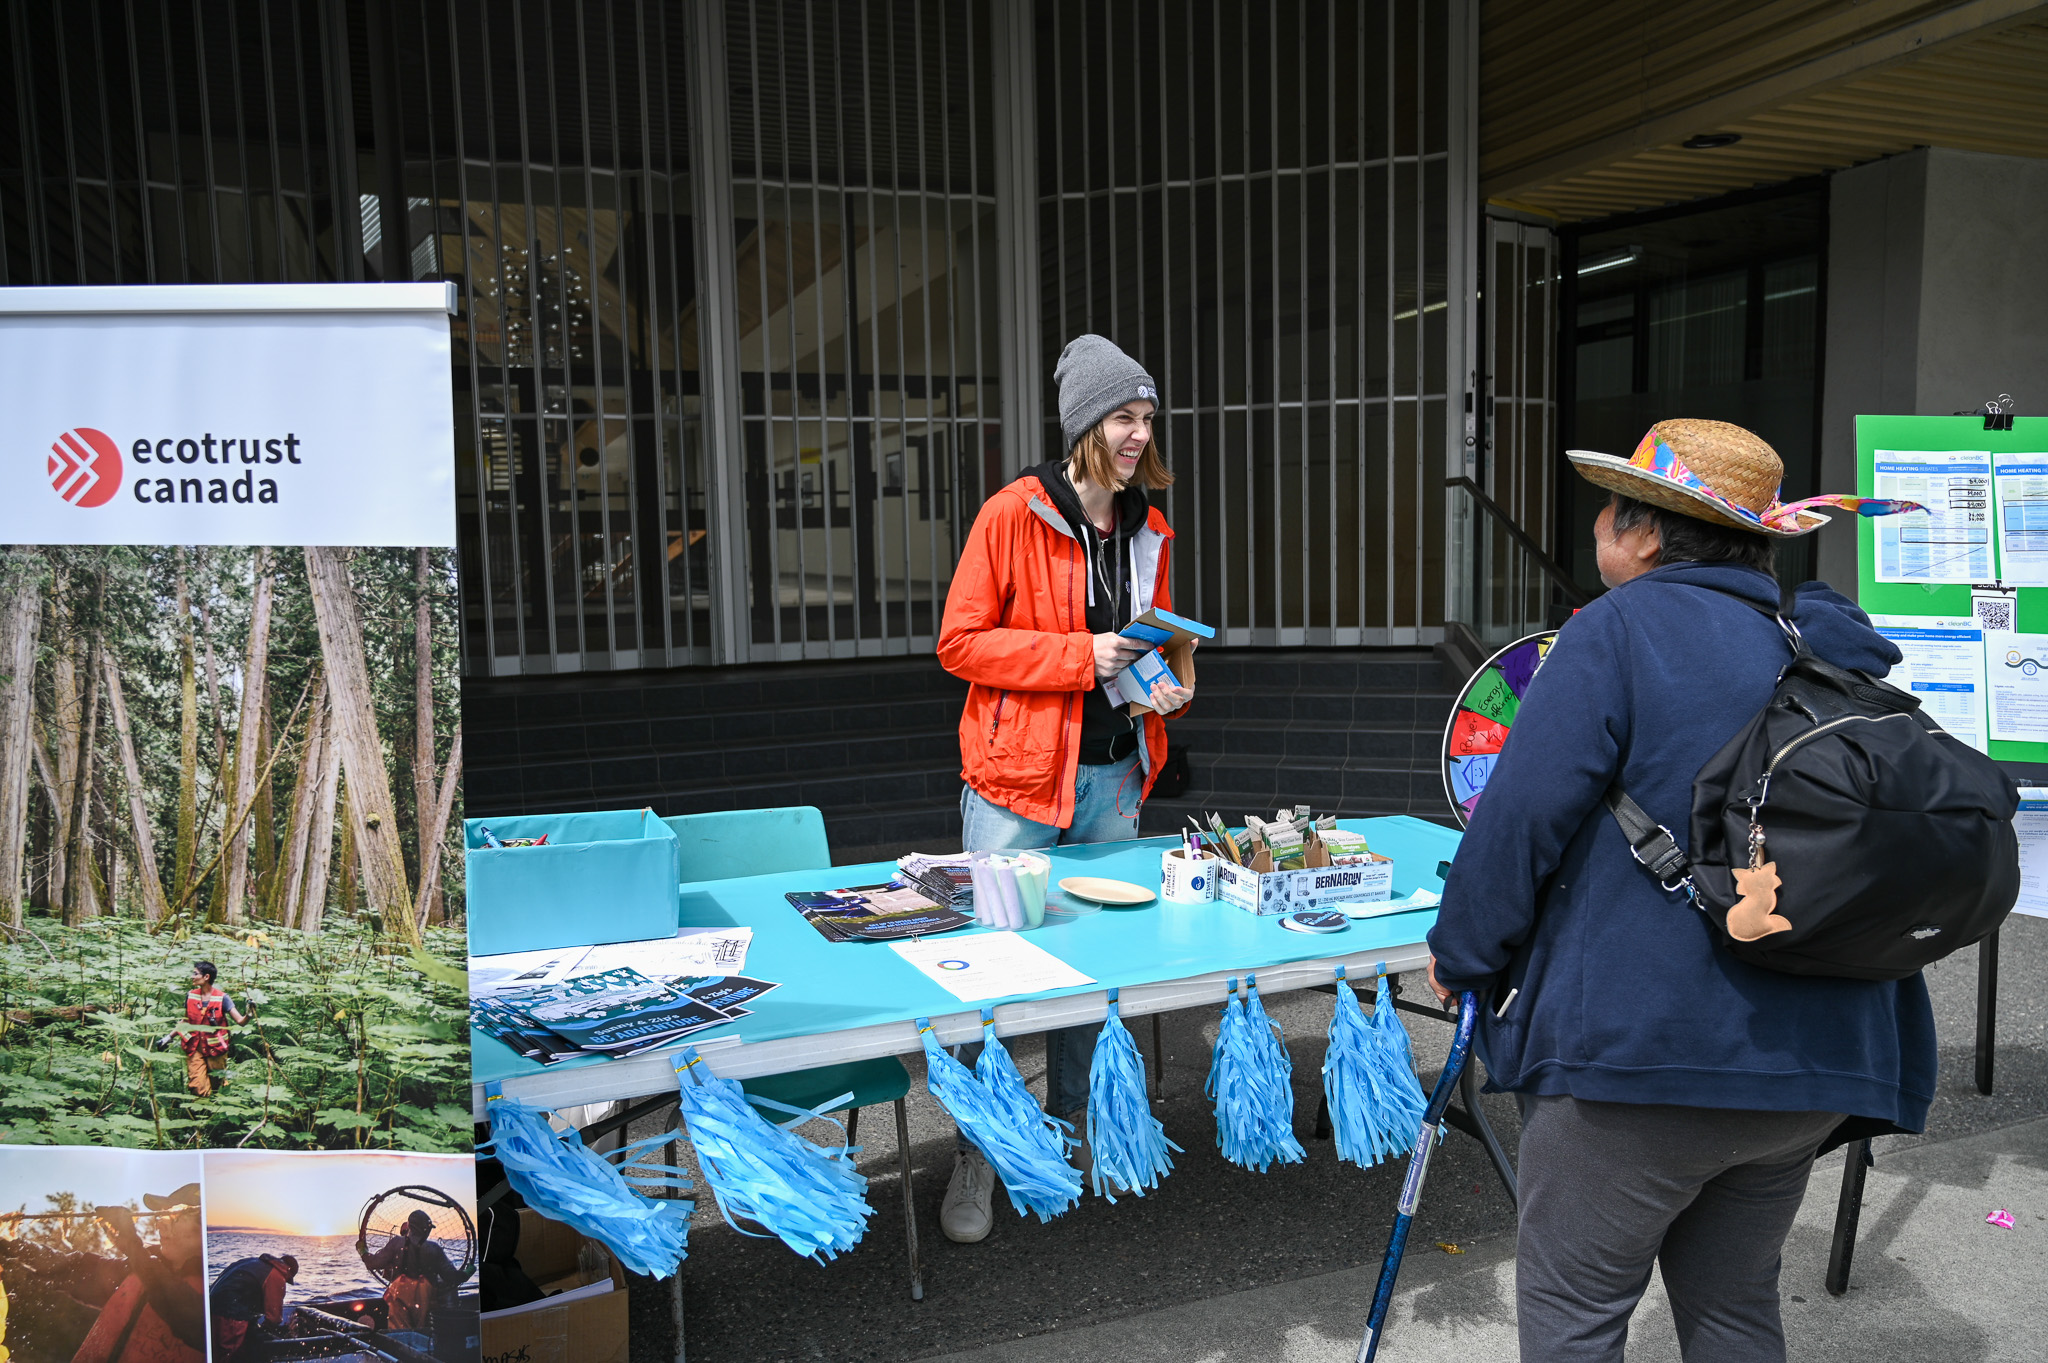 Josephine Schrott, an Analyst with the Community Energy team, travelled to Prince Rupert for Seafest in June 2023. She hosted a booth where residents could share their thoughts or learn more about home energy efficiency and opportunities to reduce utility costs in Prince Rupert.